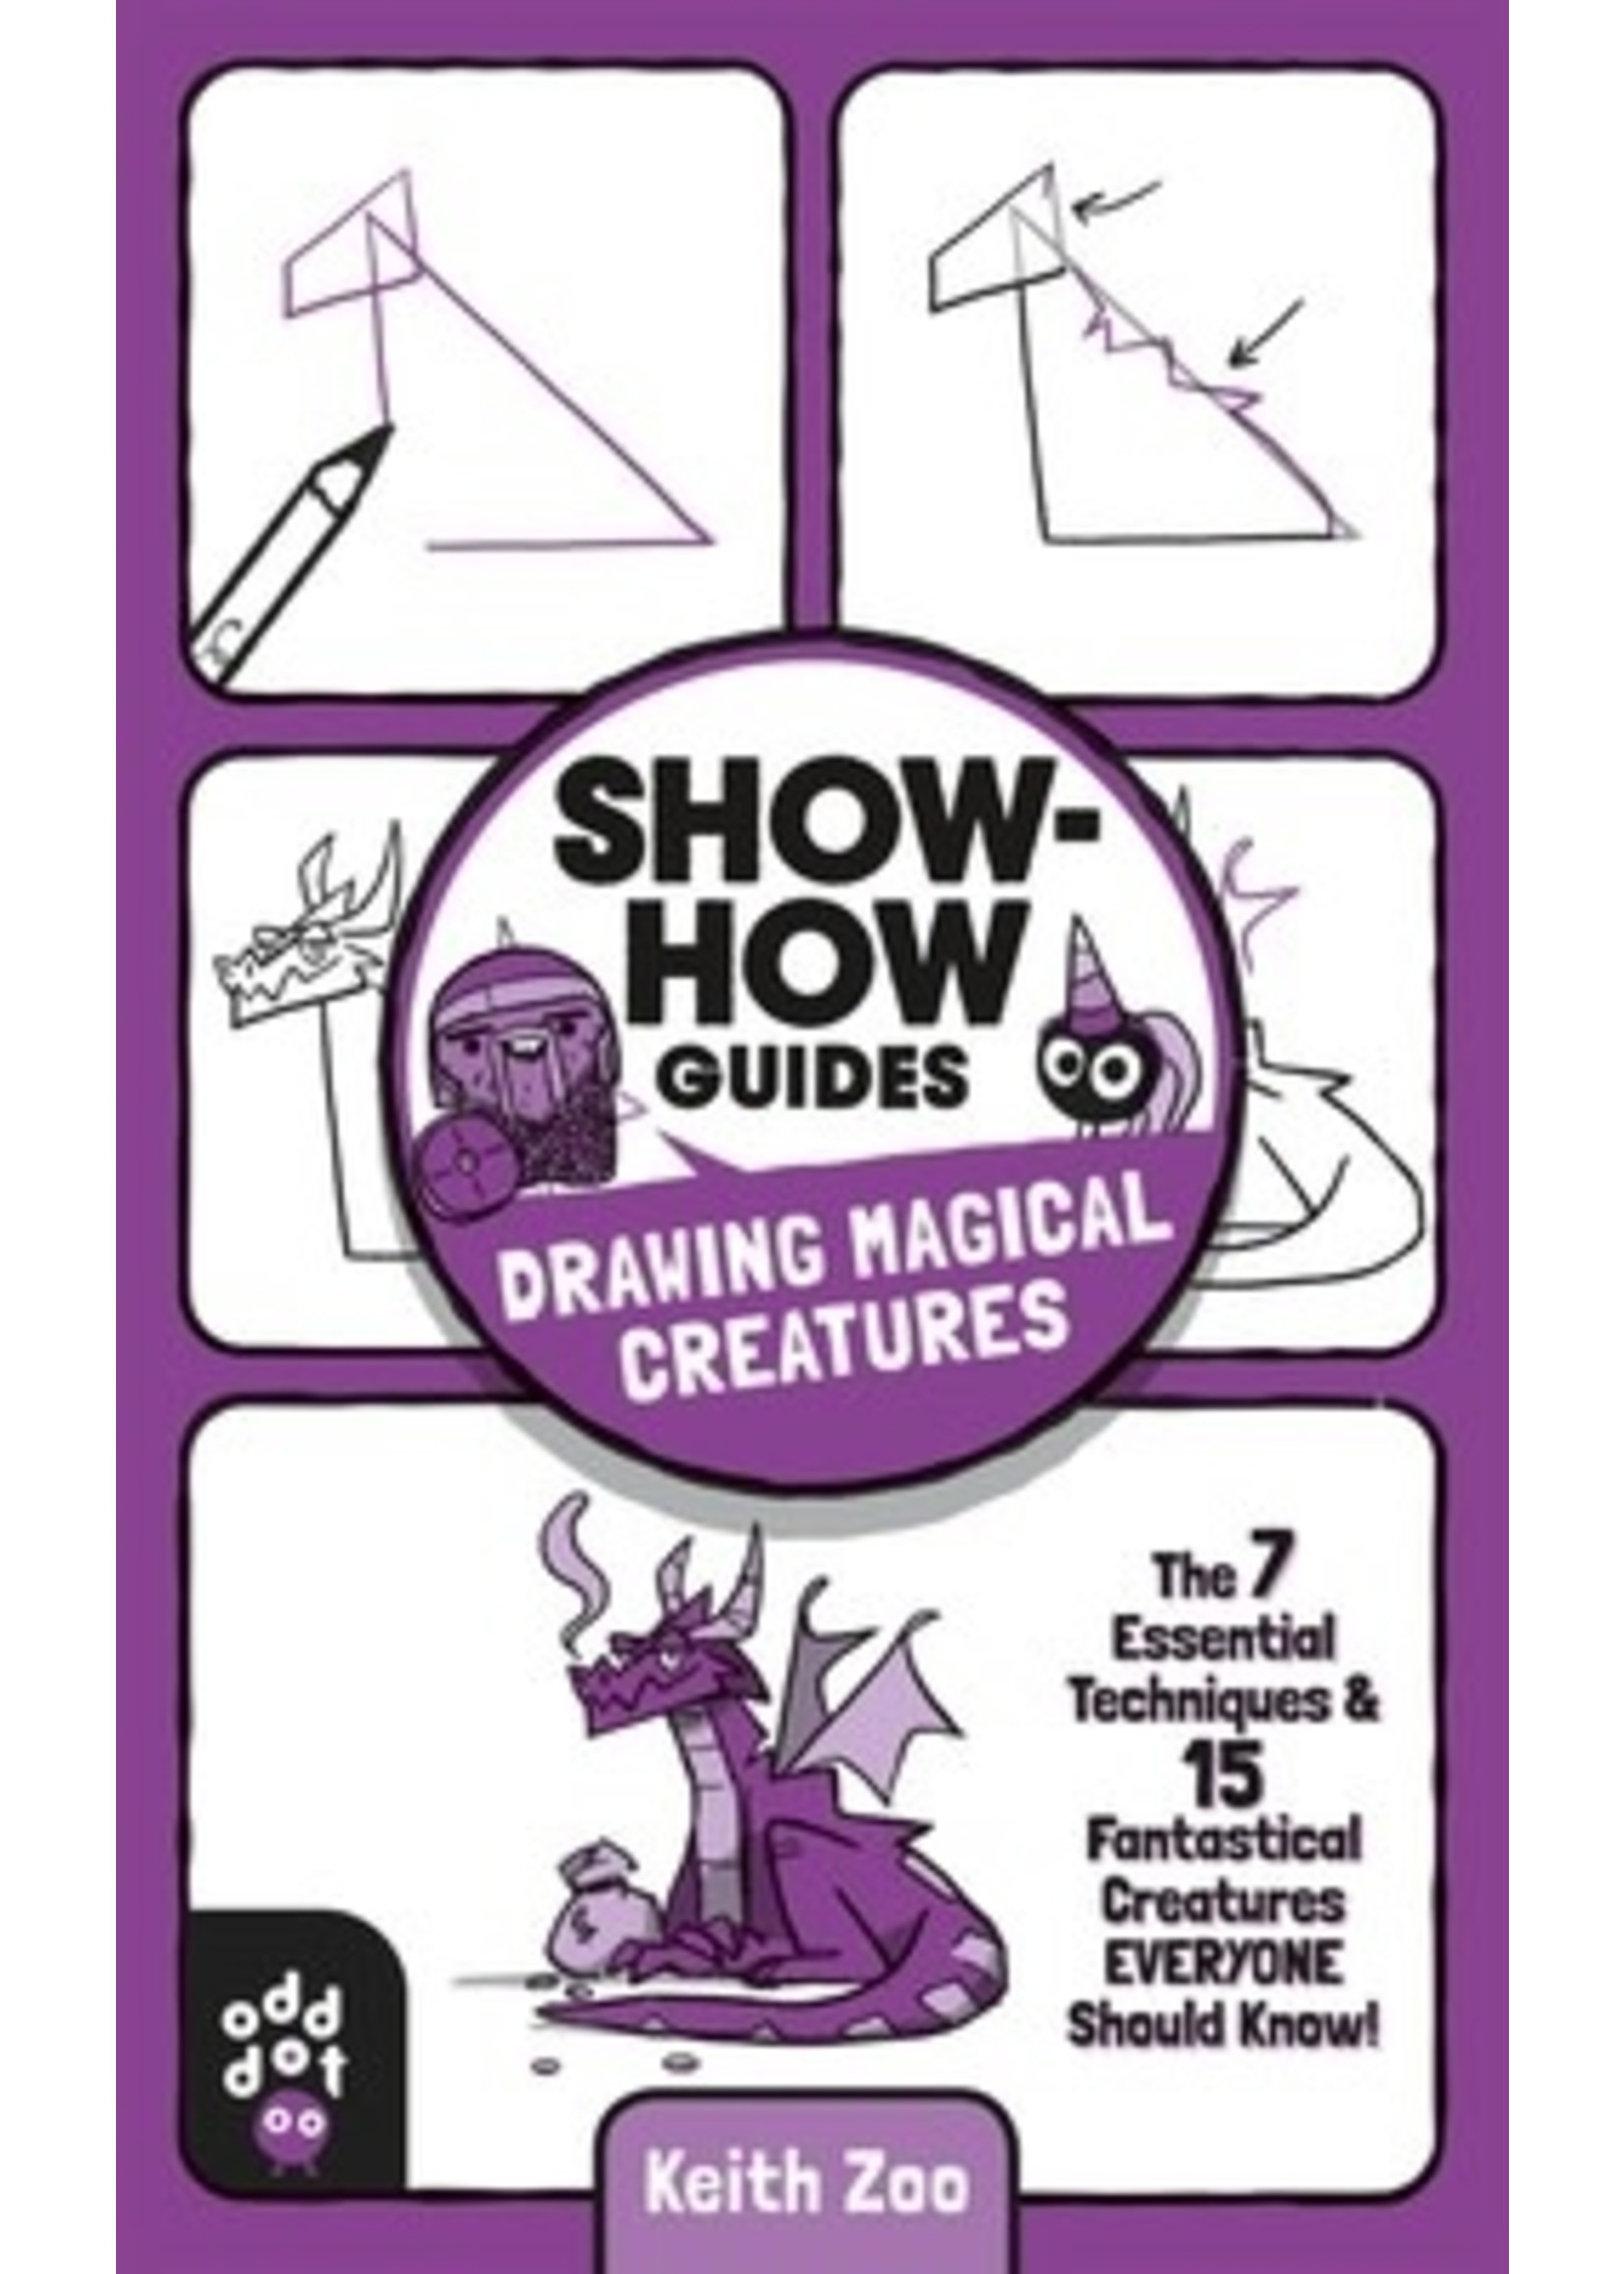 Show-How Guides: Drawing Magical Creatures: The 7 Essential Techniques 15 Fantastical Creatures Everyone Should Know! by Keith Zulawnik